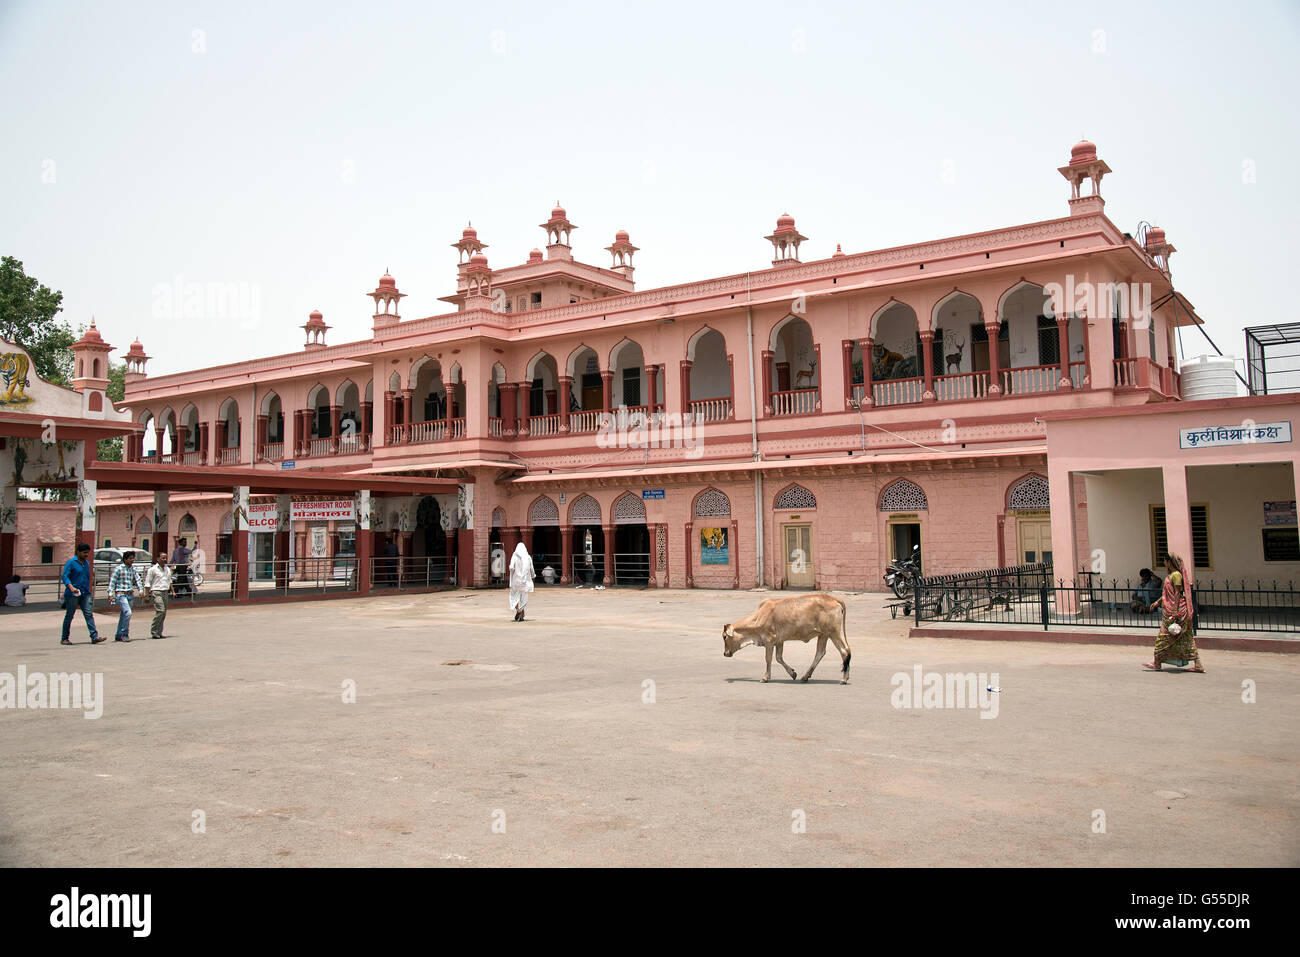 The image of Sawai Madhopur Railway station was taken in  India Stock Photo